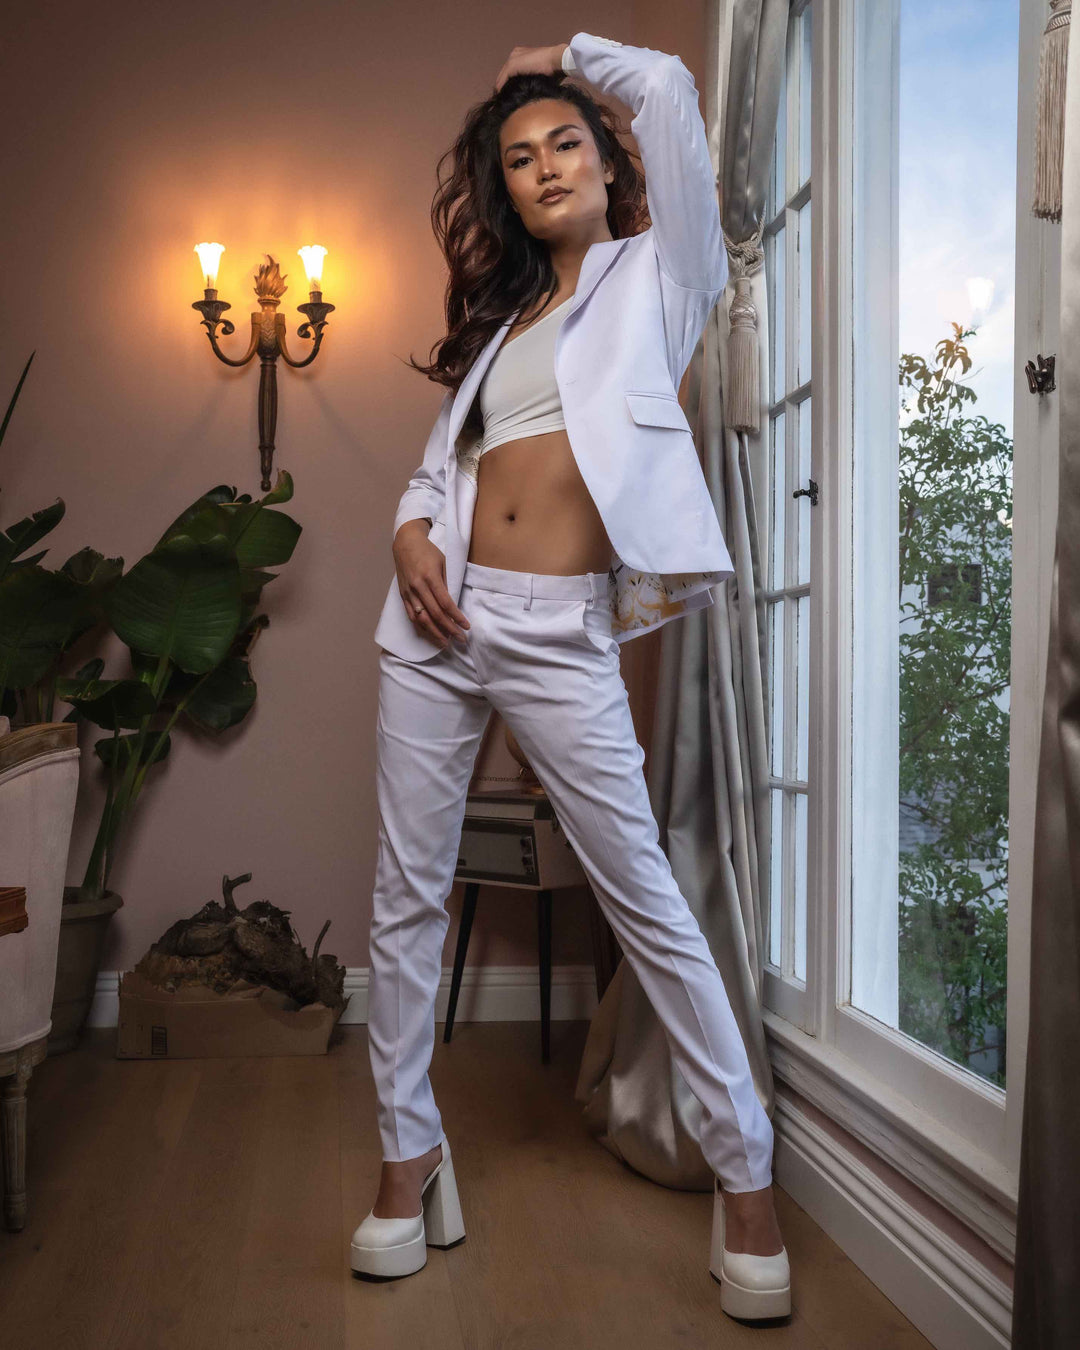 CLEO By Peanut Butter Collection Ramses Chalk White Suit - FOSTANI